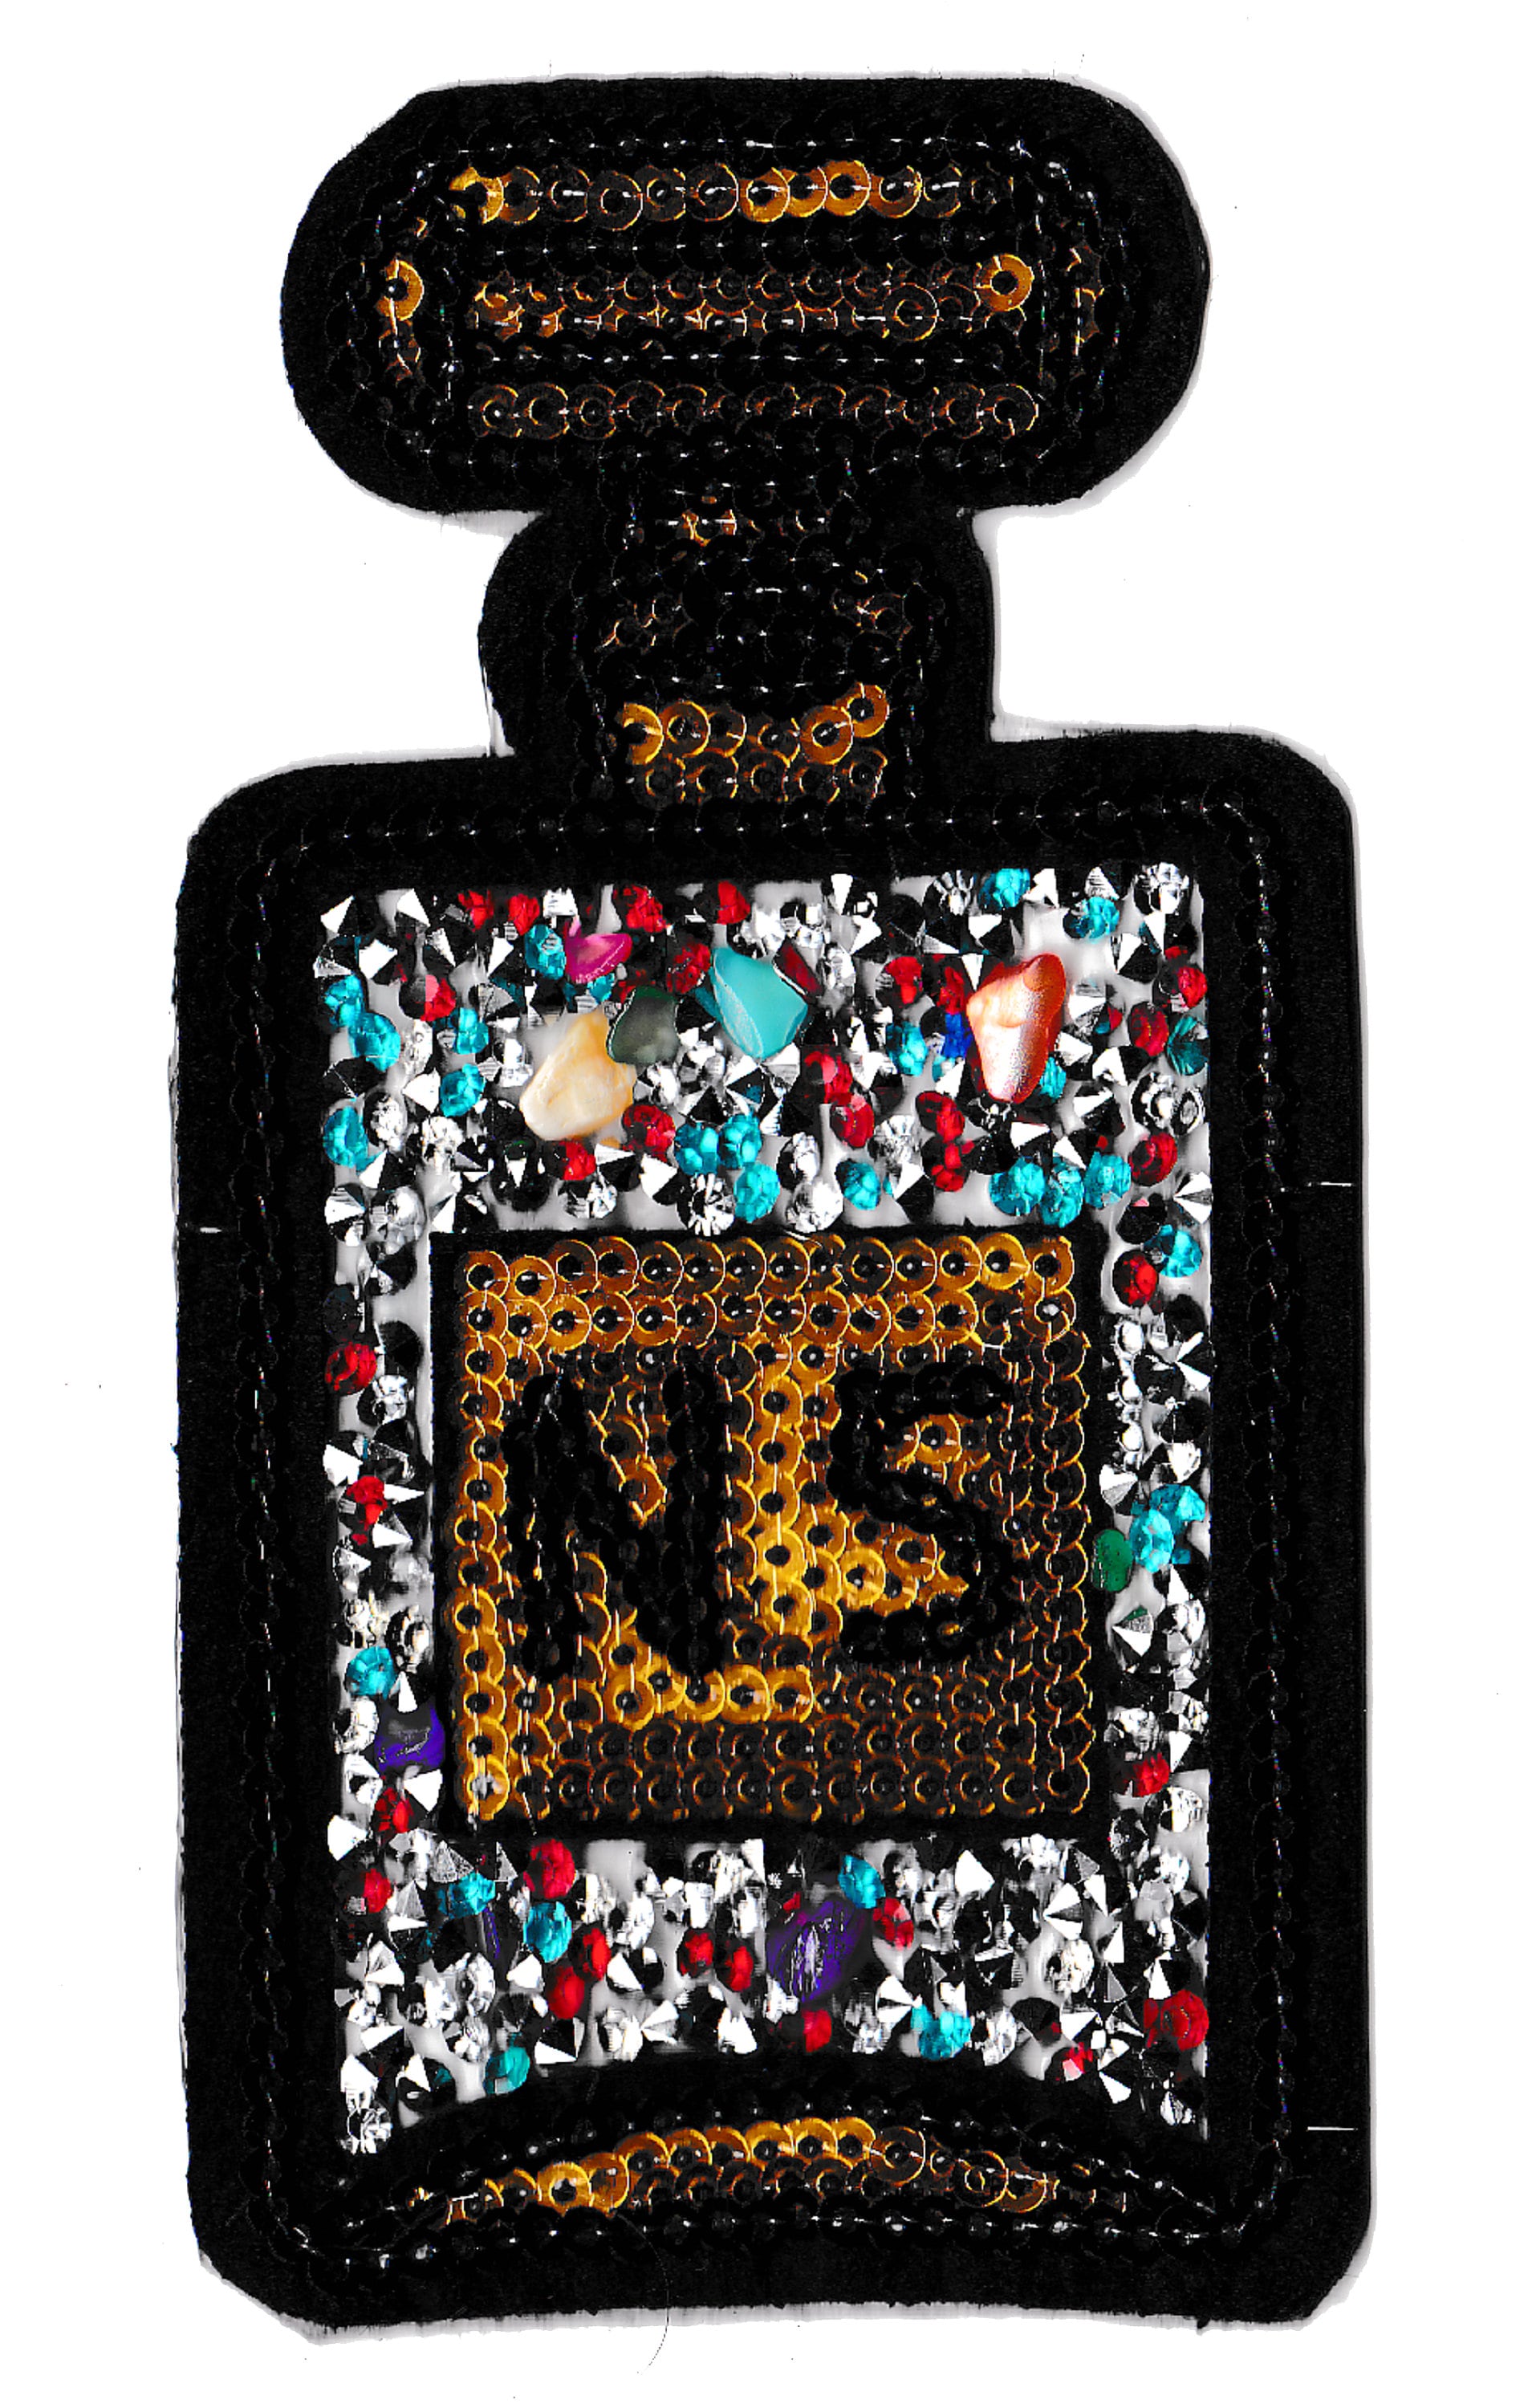 Chanel Patch,SYL Patch,Diro Patch,Patch For Clothing,Glitter Patches